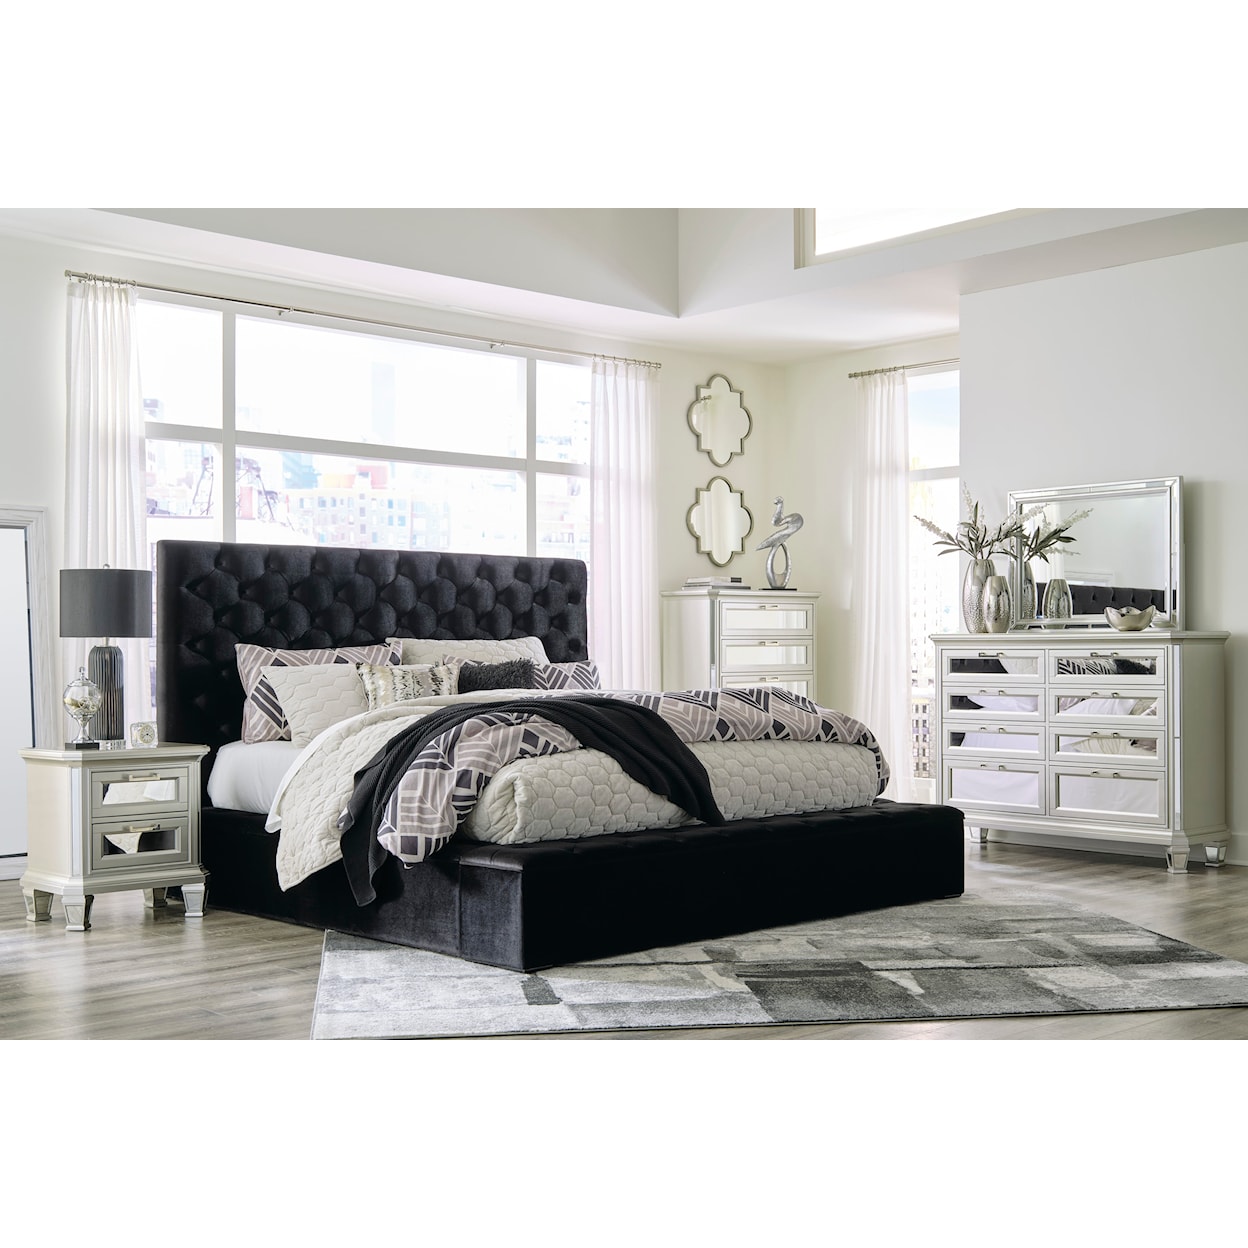 Signature Design by Ashley Lindenfield California King Bedroom Set